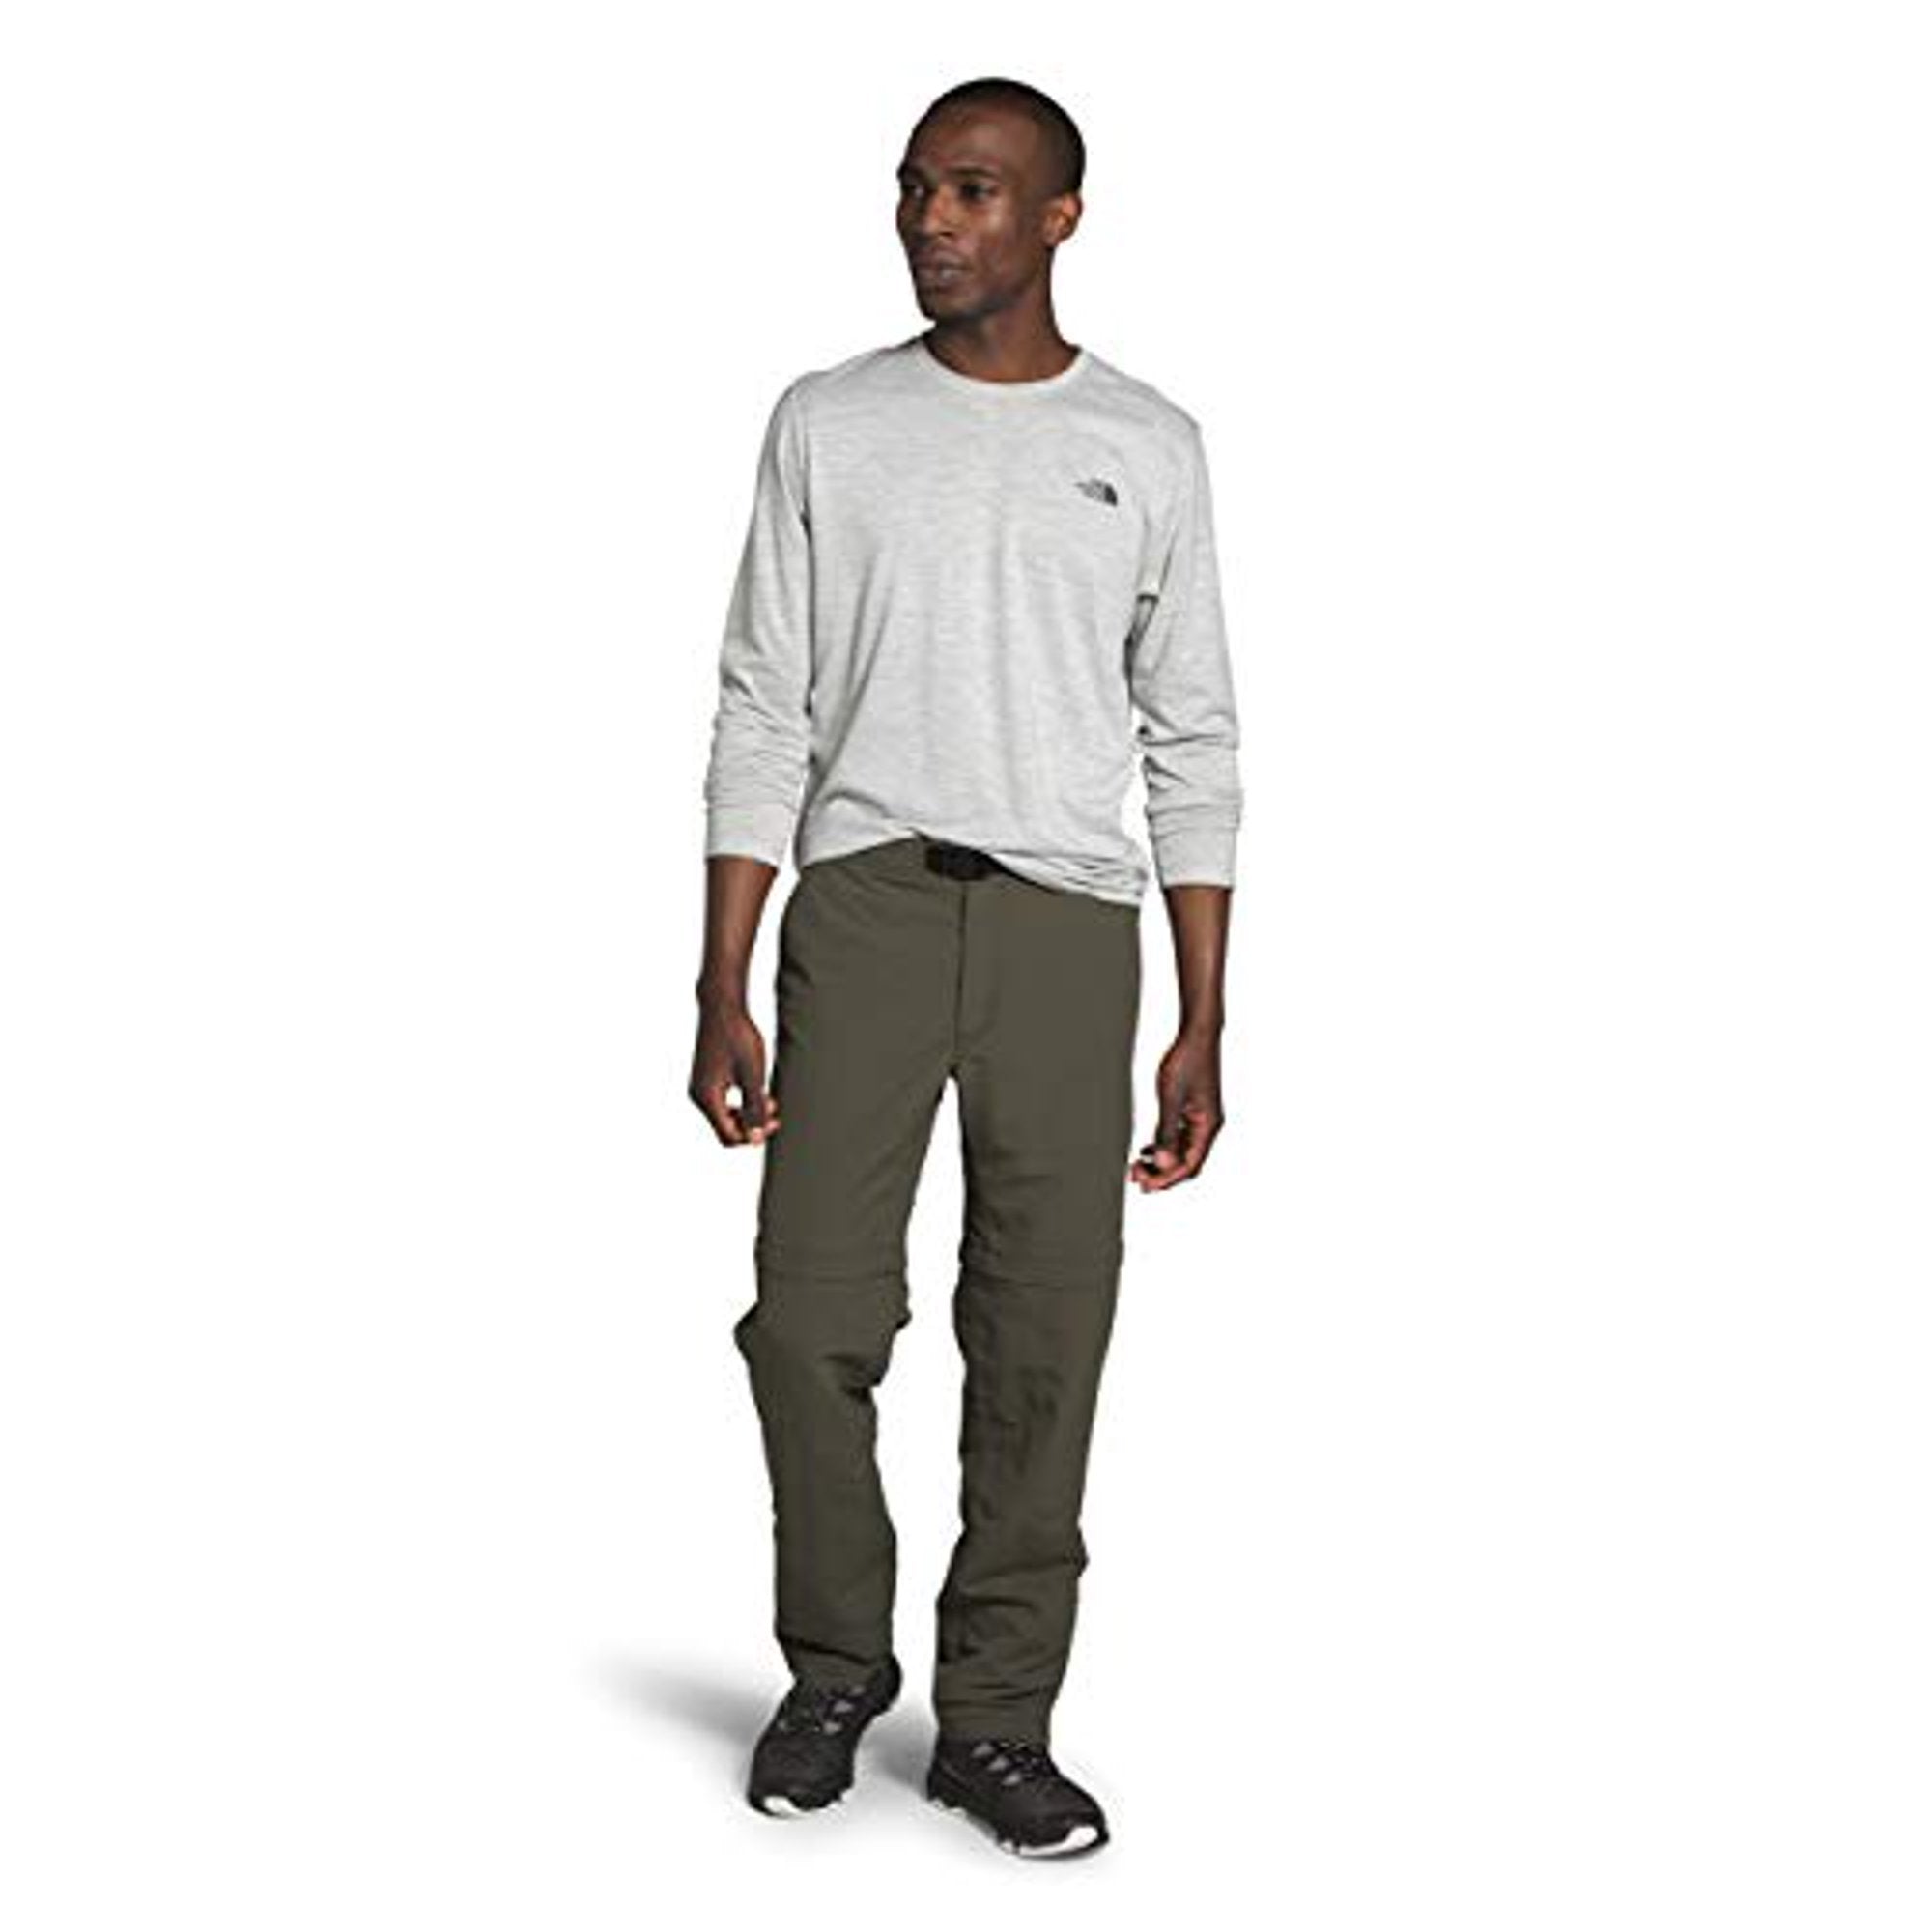 THE NORTH FACE Men's Seymore Pant